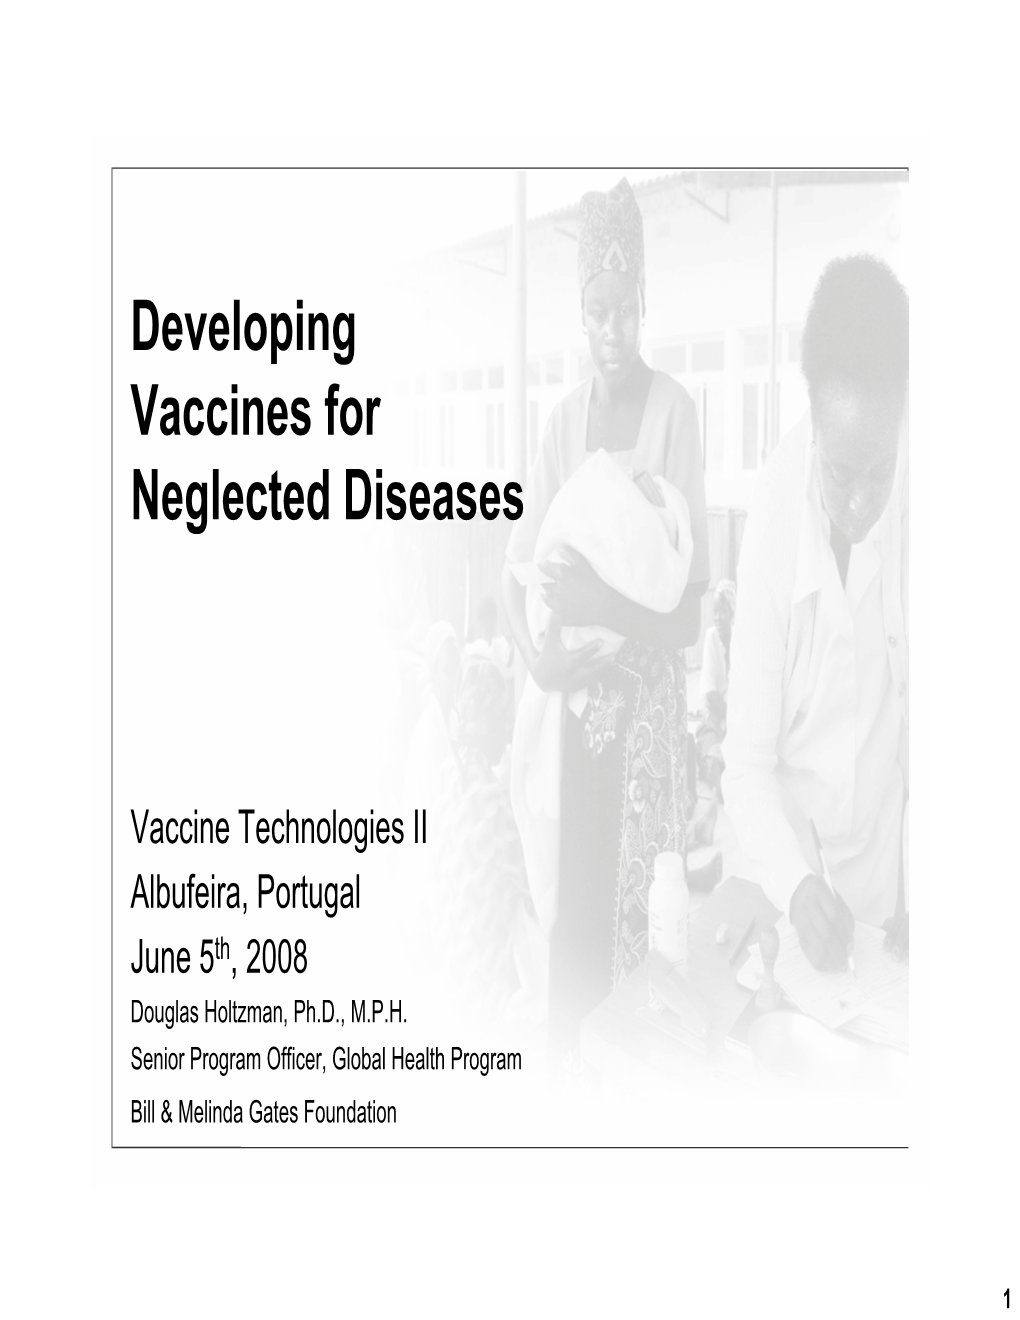 Developing Vaccines for Neglected Diseases